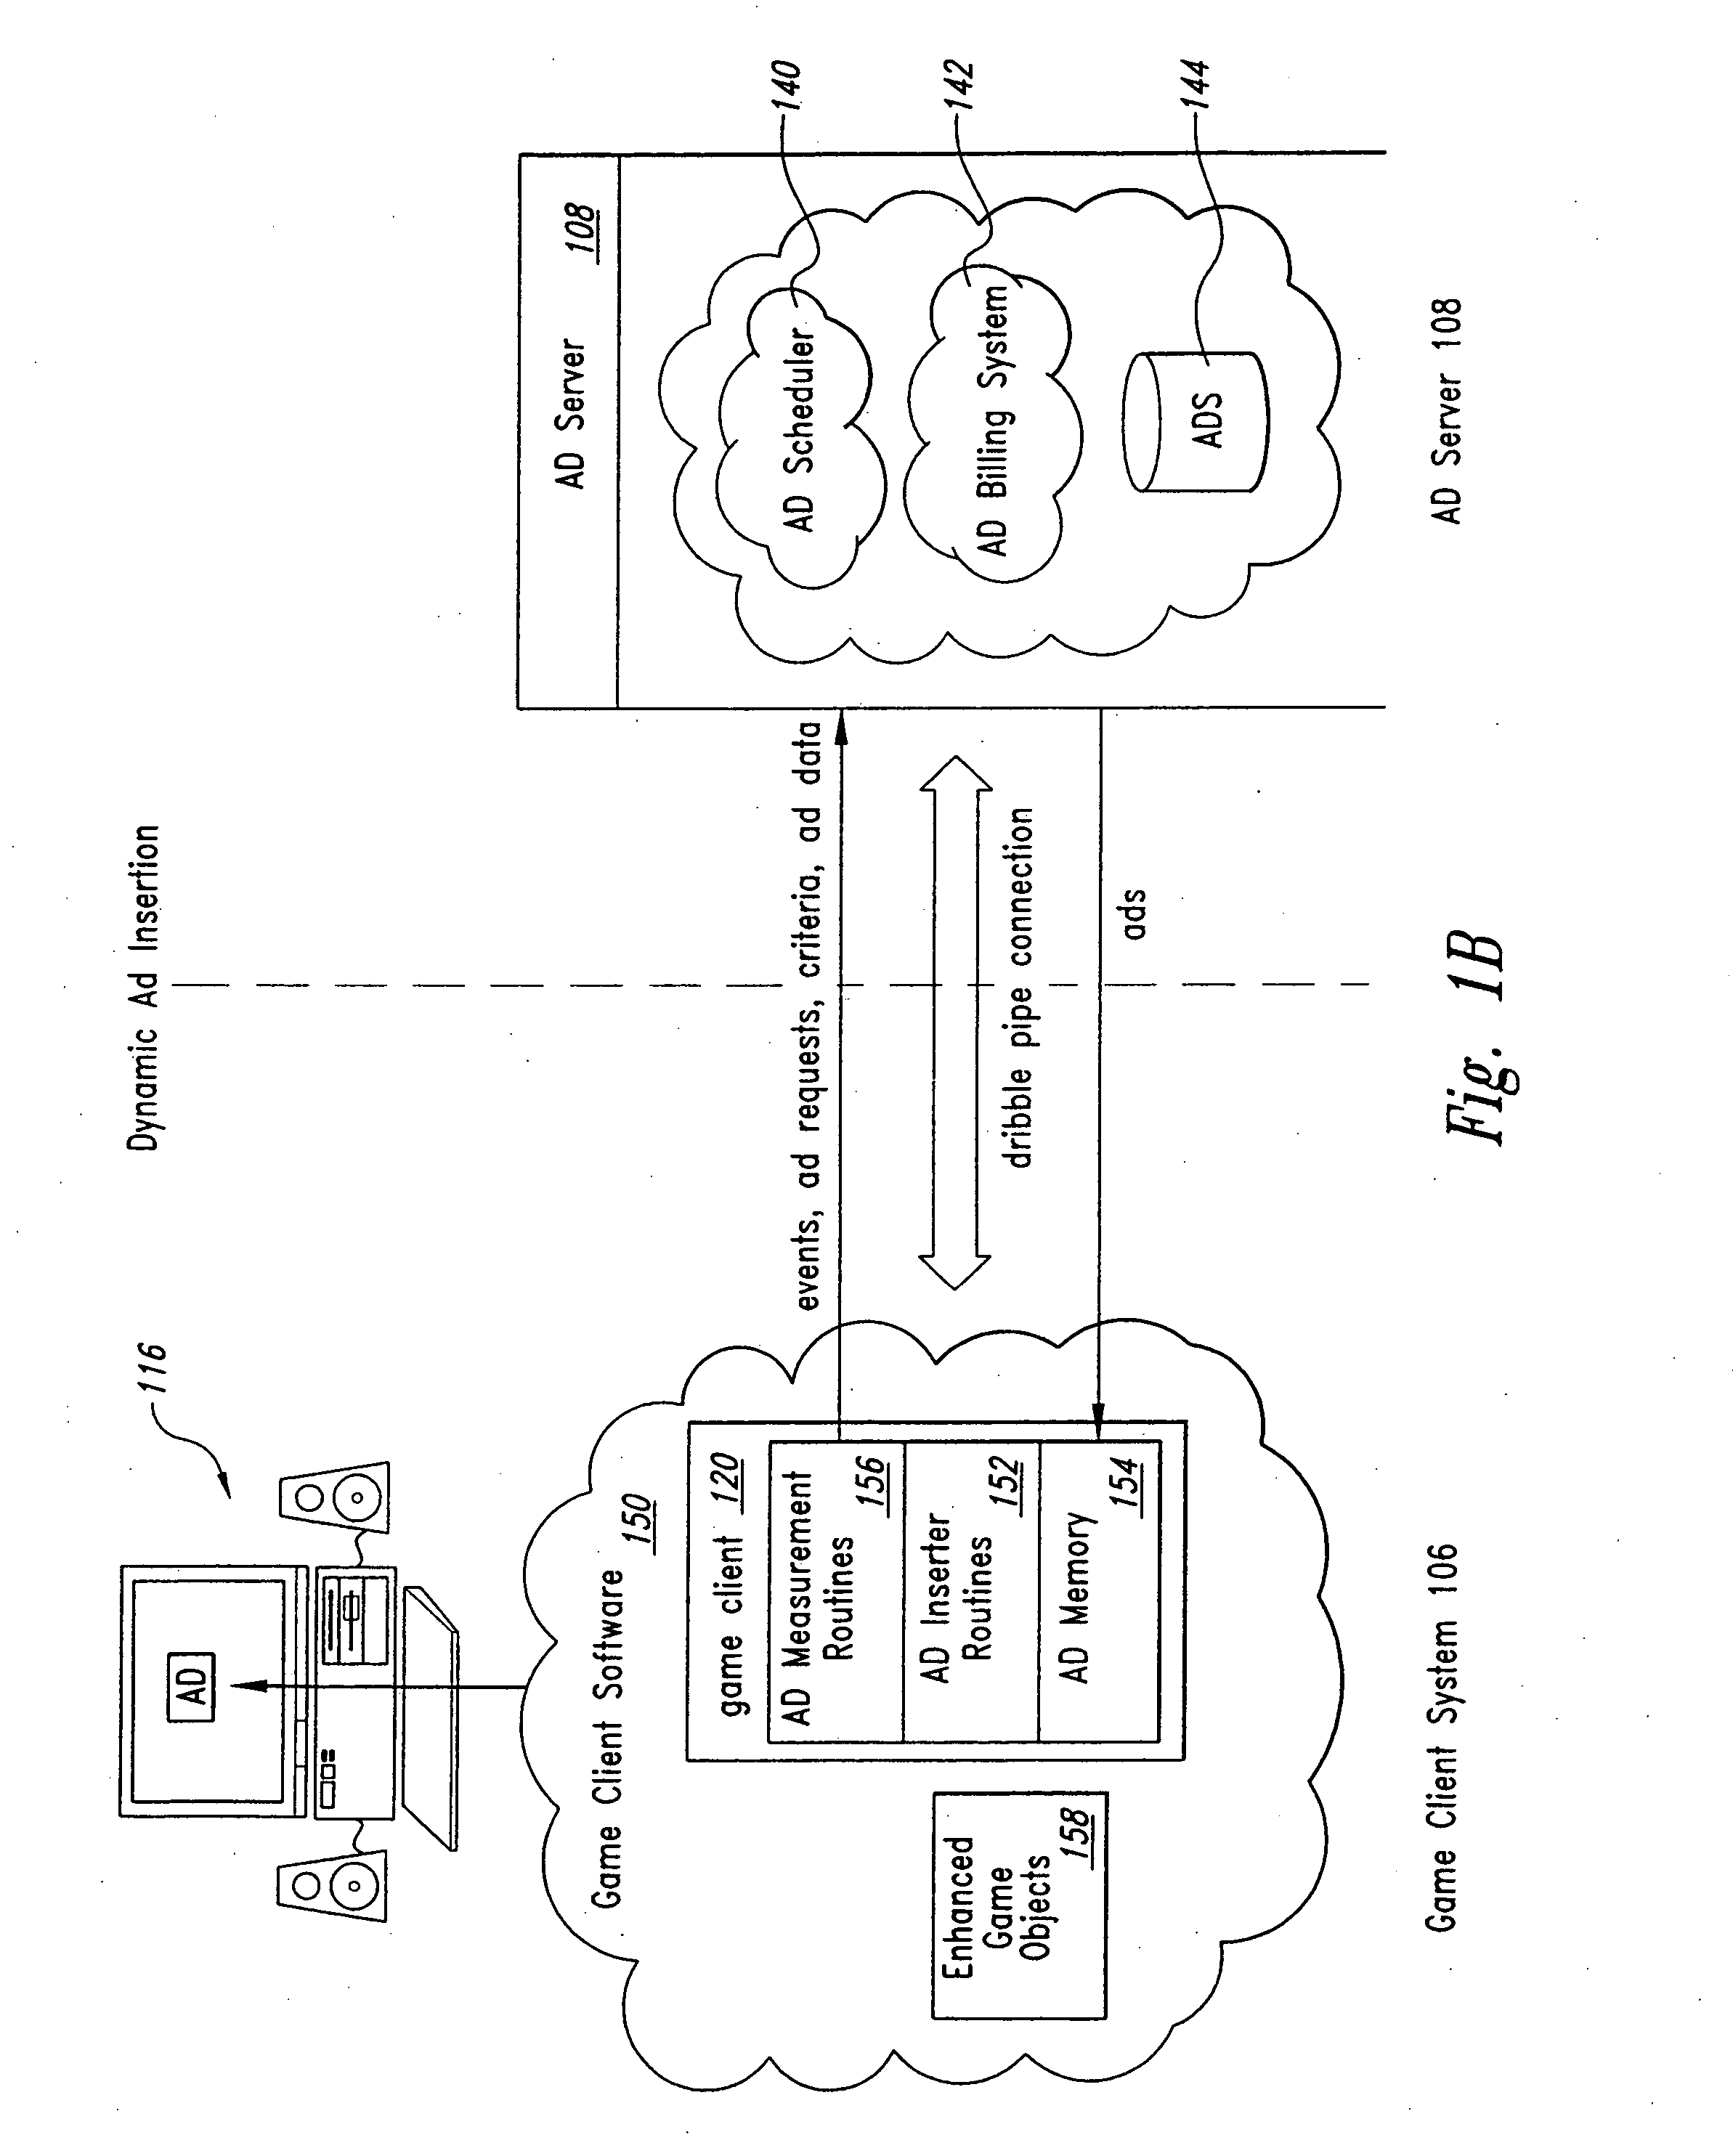 Method and system for modifying object behavior based upon dynamically incorporated advertising content